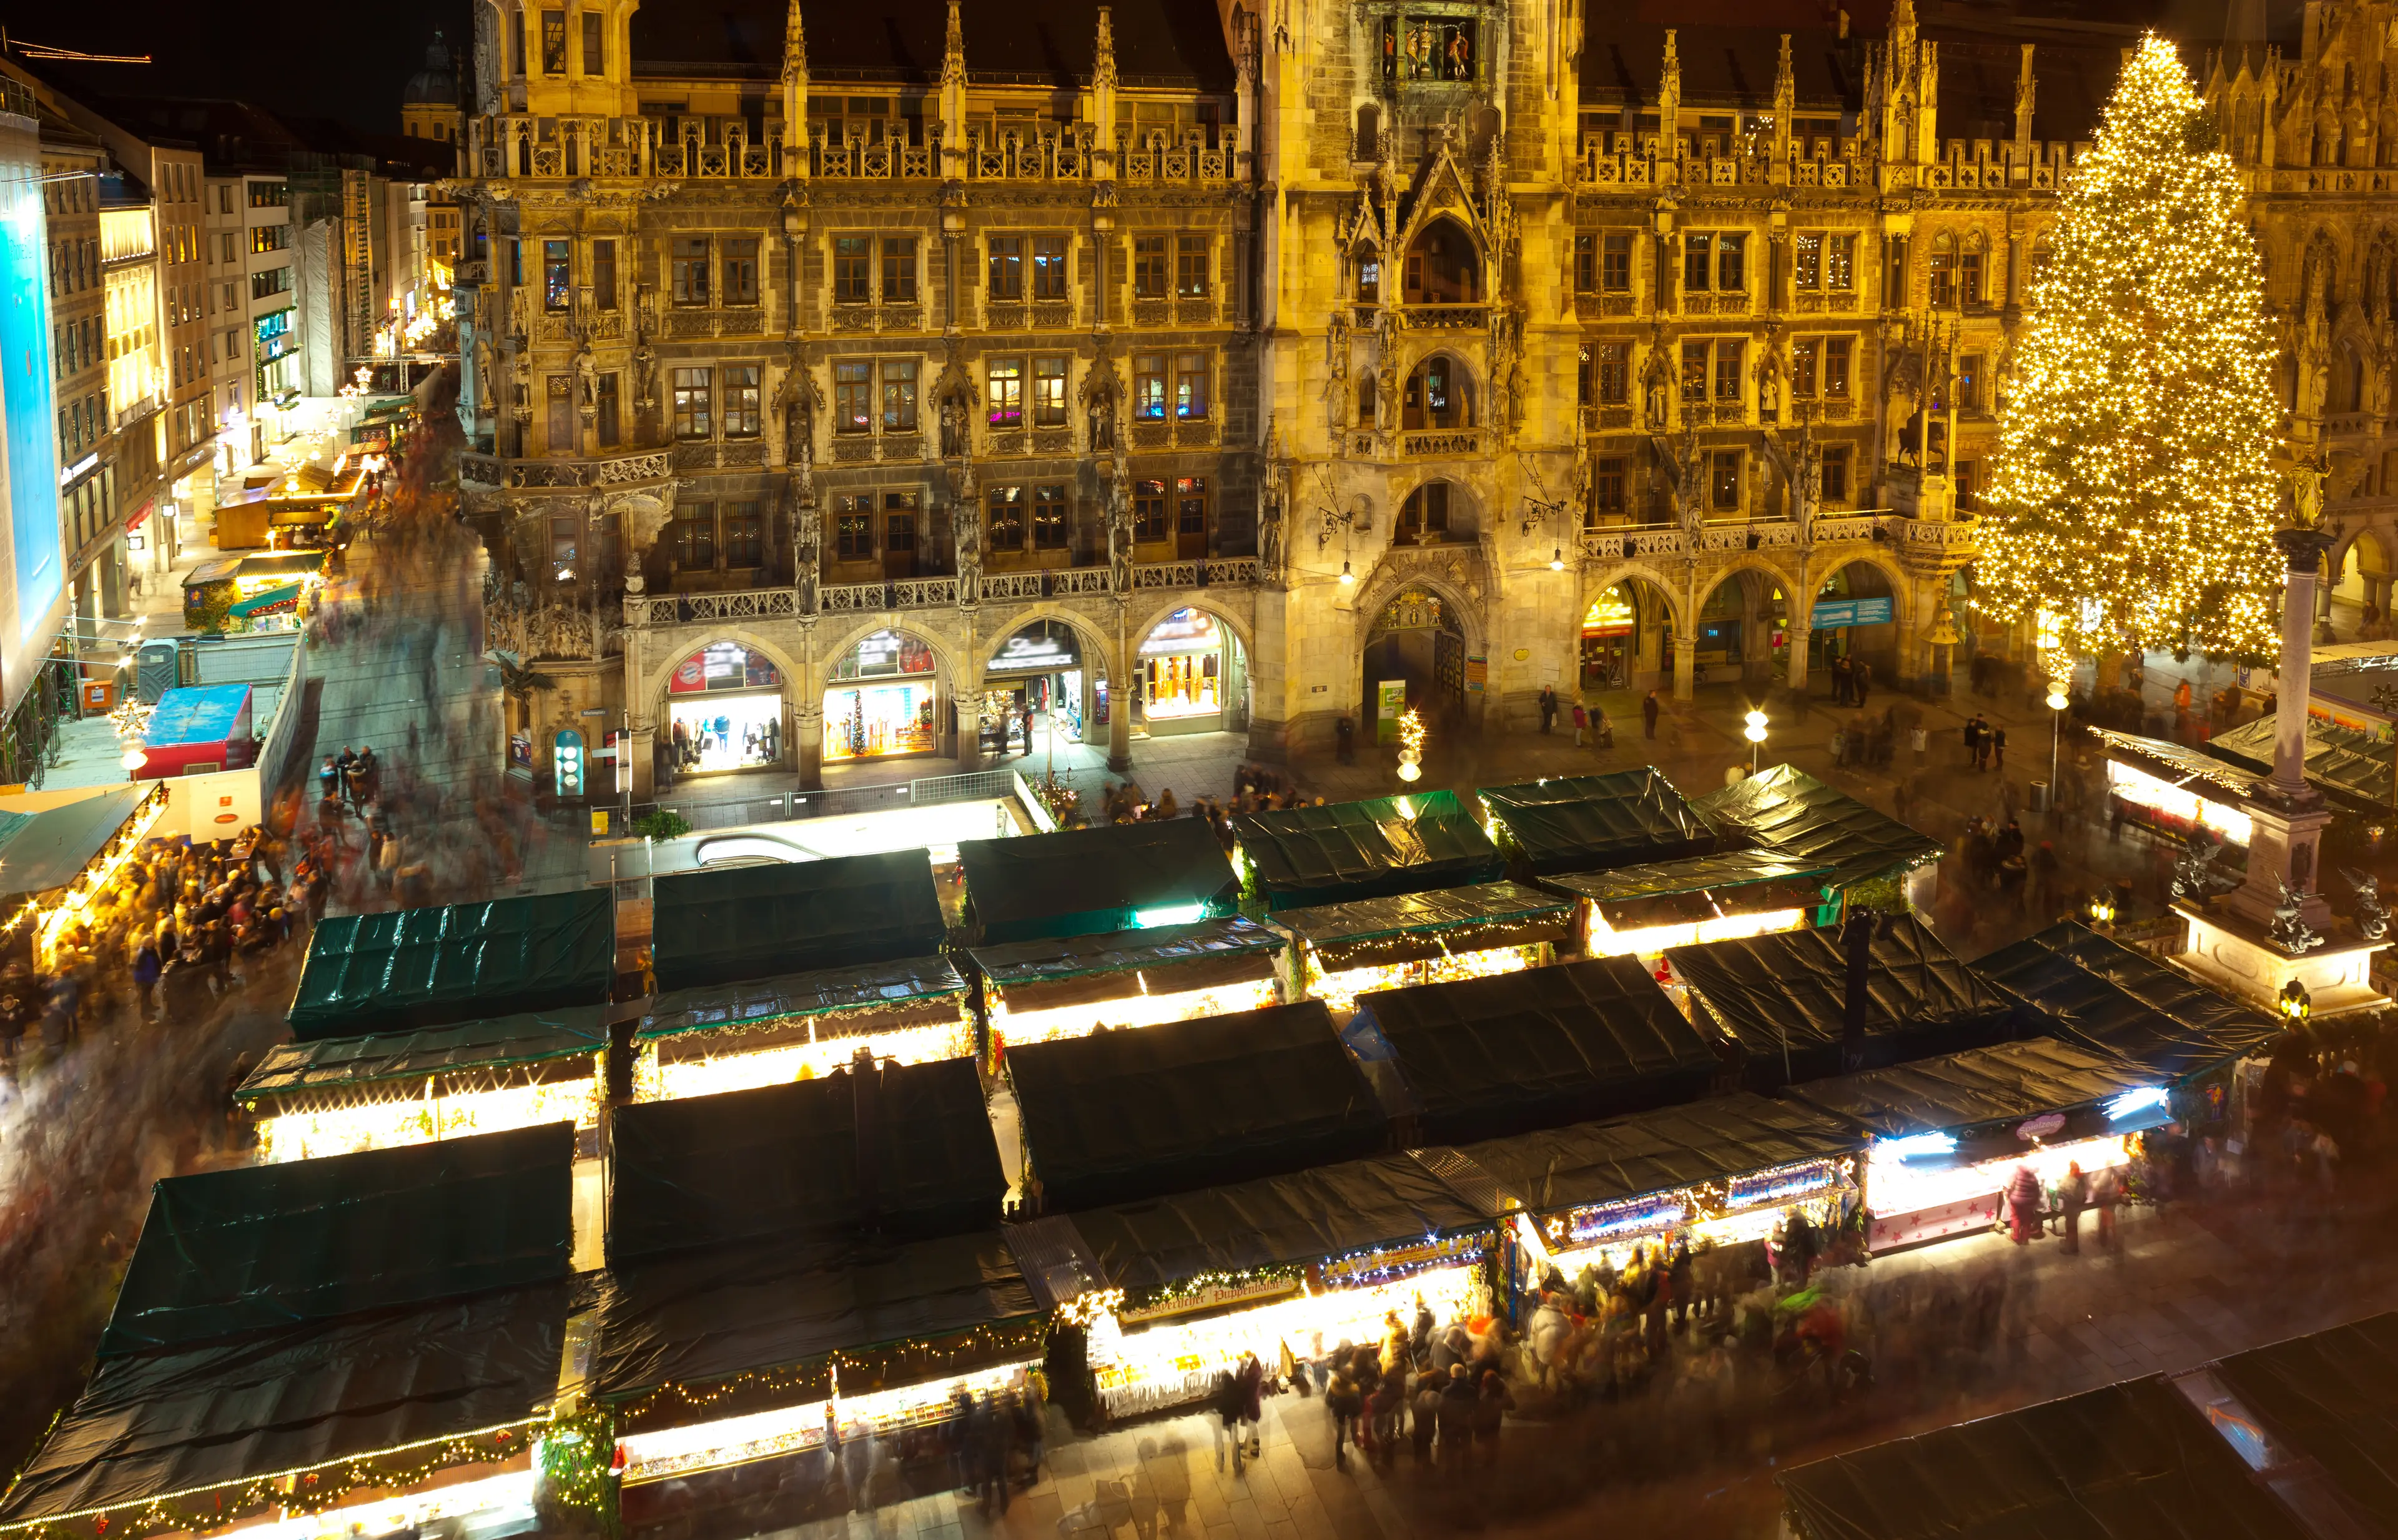 5-Day Family Christmas Holiday Itinerary in Munich, Germany